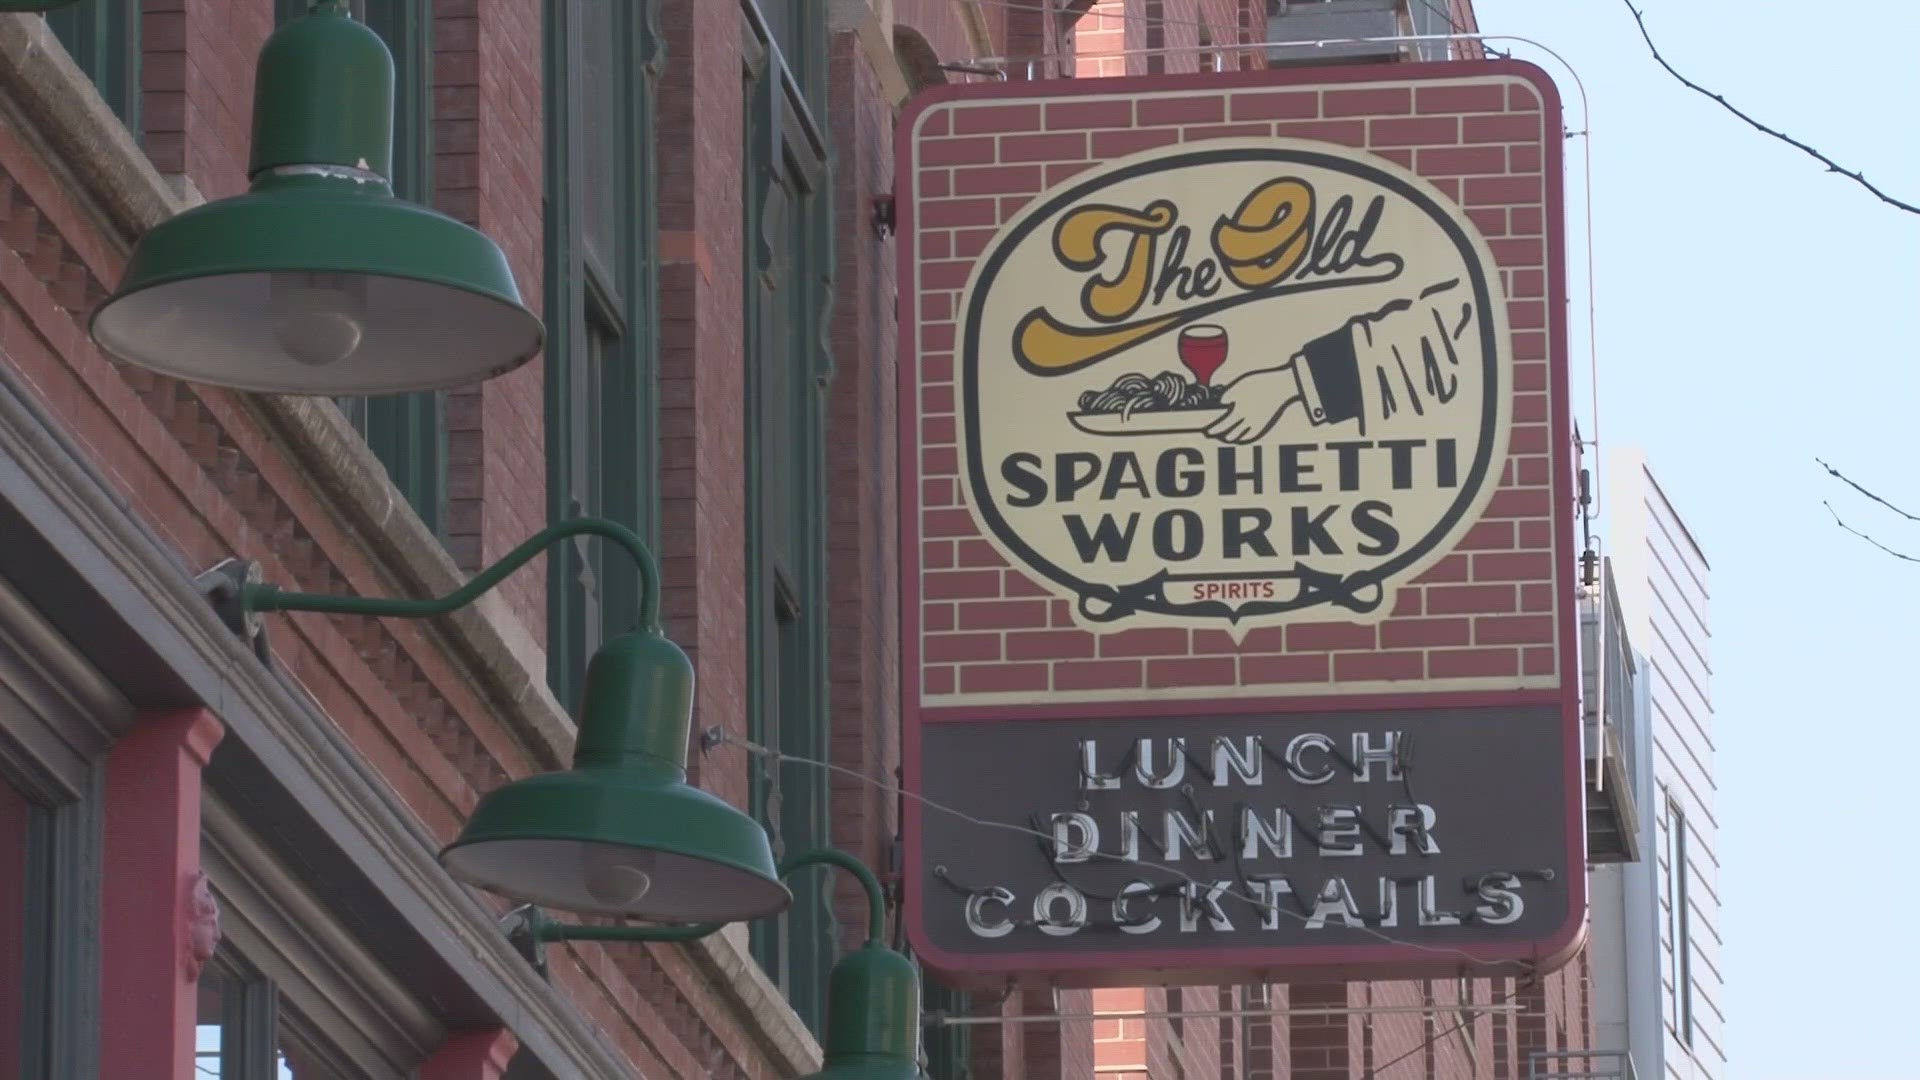 "Through the floods and the remodels, all the changes that come along with 45 years, we've been there for them," said Shelly Stokes, president of Spaghetti Works.